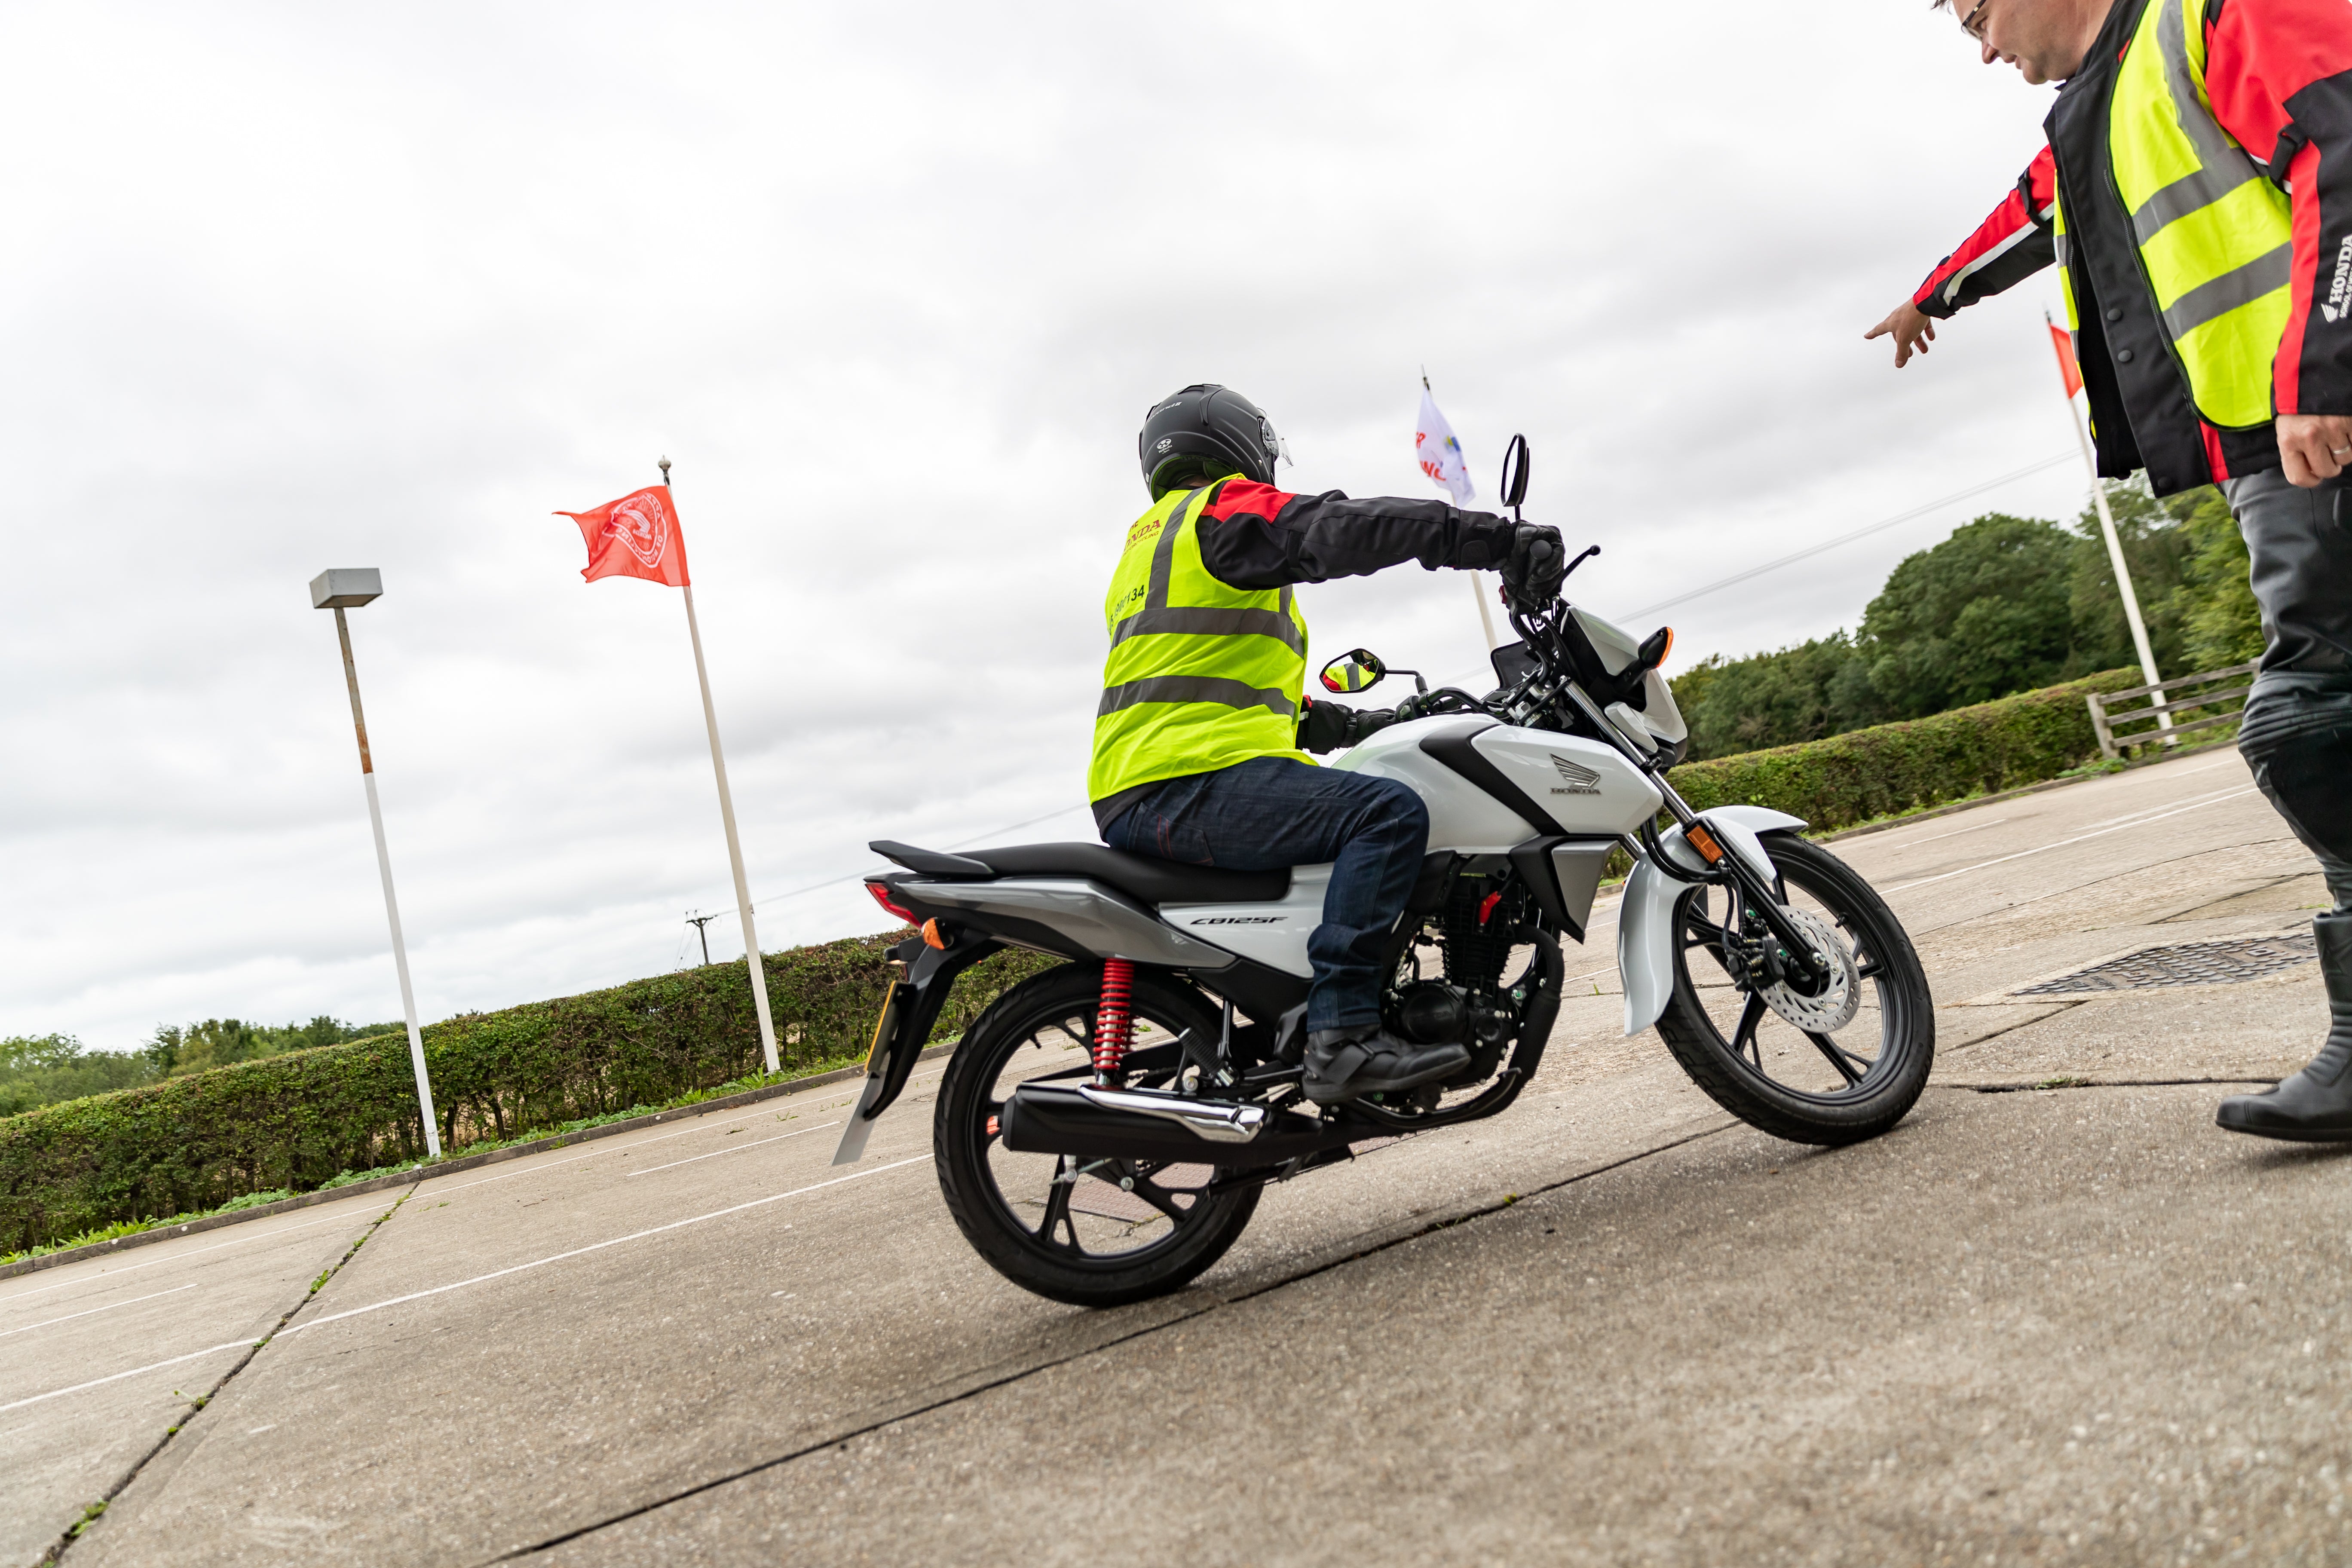 CBT Bournemouth | Motorcycle Training Dorset | Stepping Up Course | Full License Motorbike Course | Motorcycle Training Bournemouth & Poole